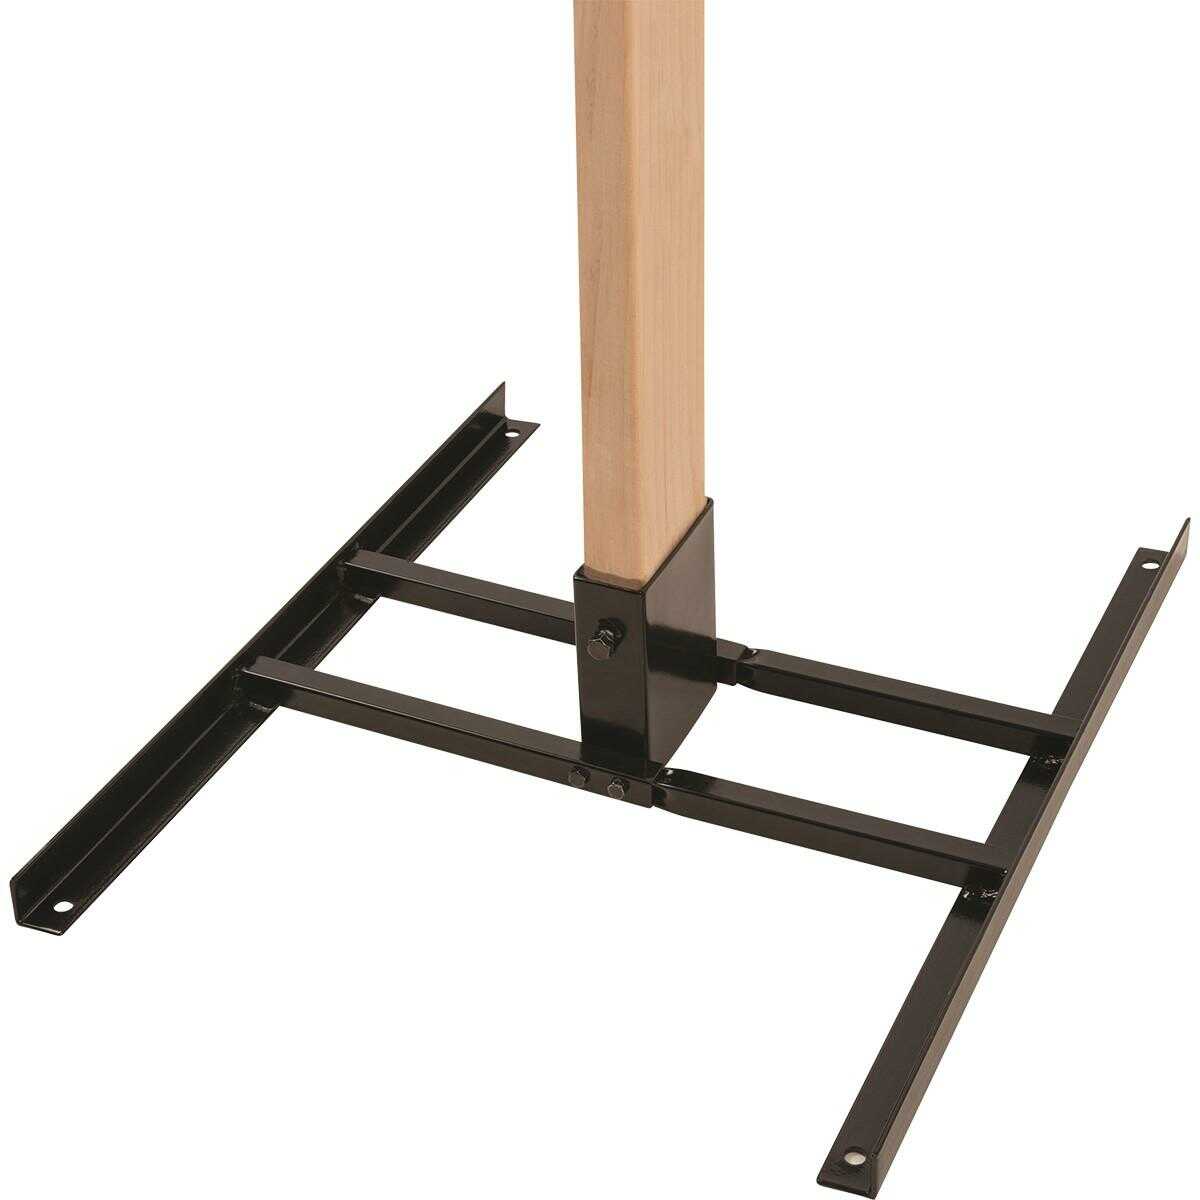 Ez-aim 15543 Shooting Target Stand Base Black Powder Coated Steel, 21" Long & Compatible With 2" X 4" Lumber